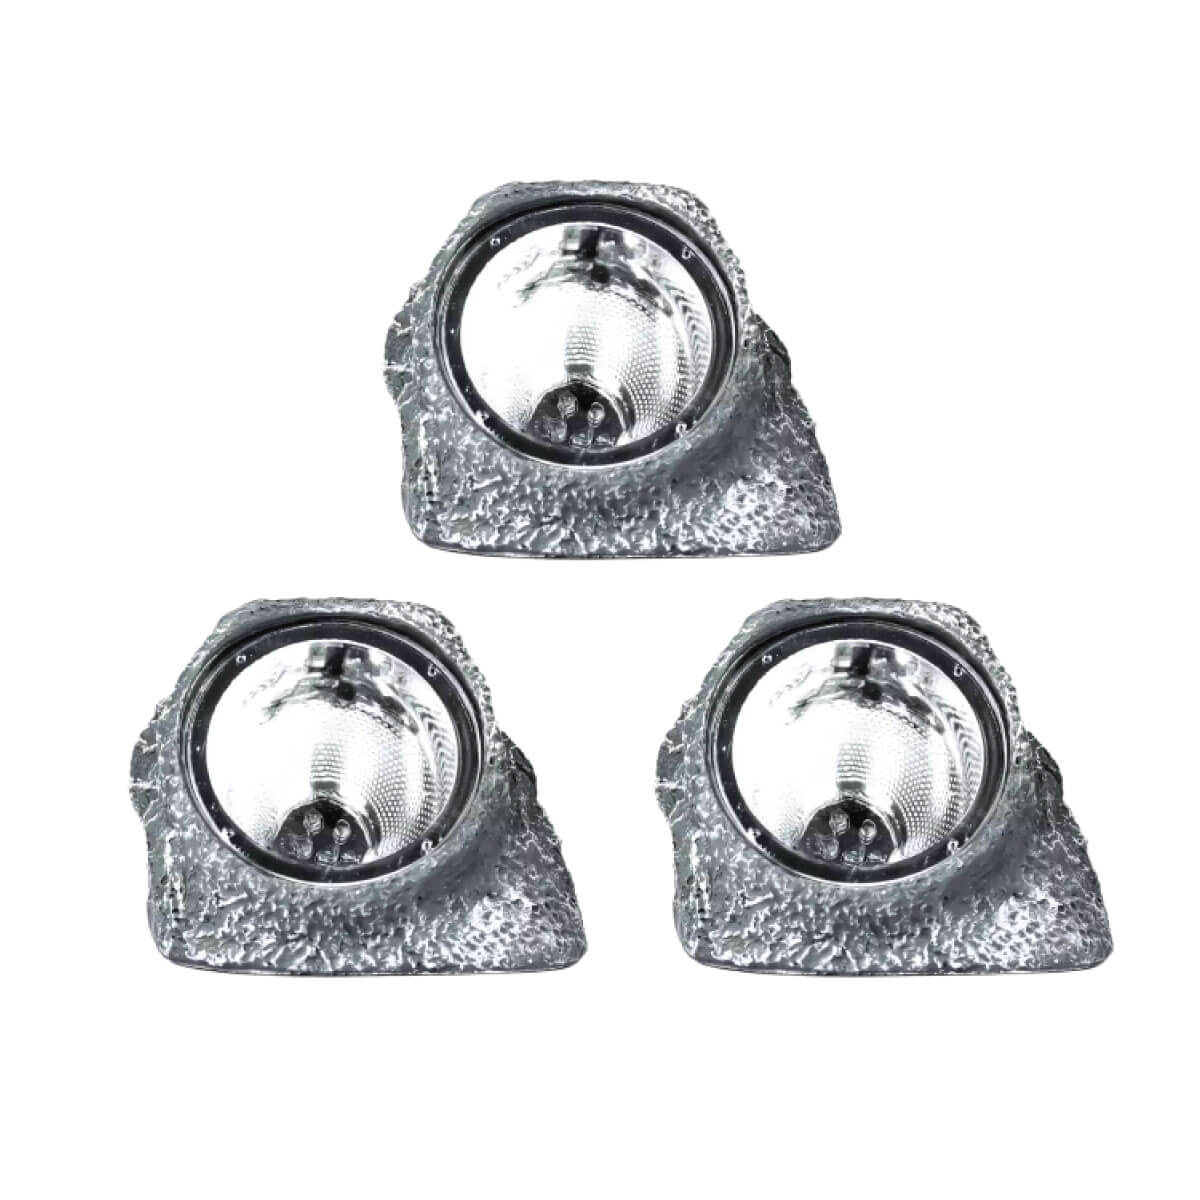 View Pack of 3 Augusta Solar LED Decorative Large Rock Light information